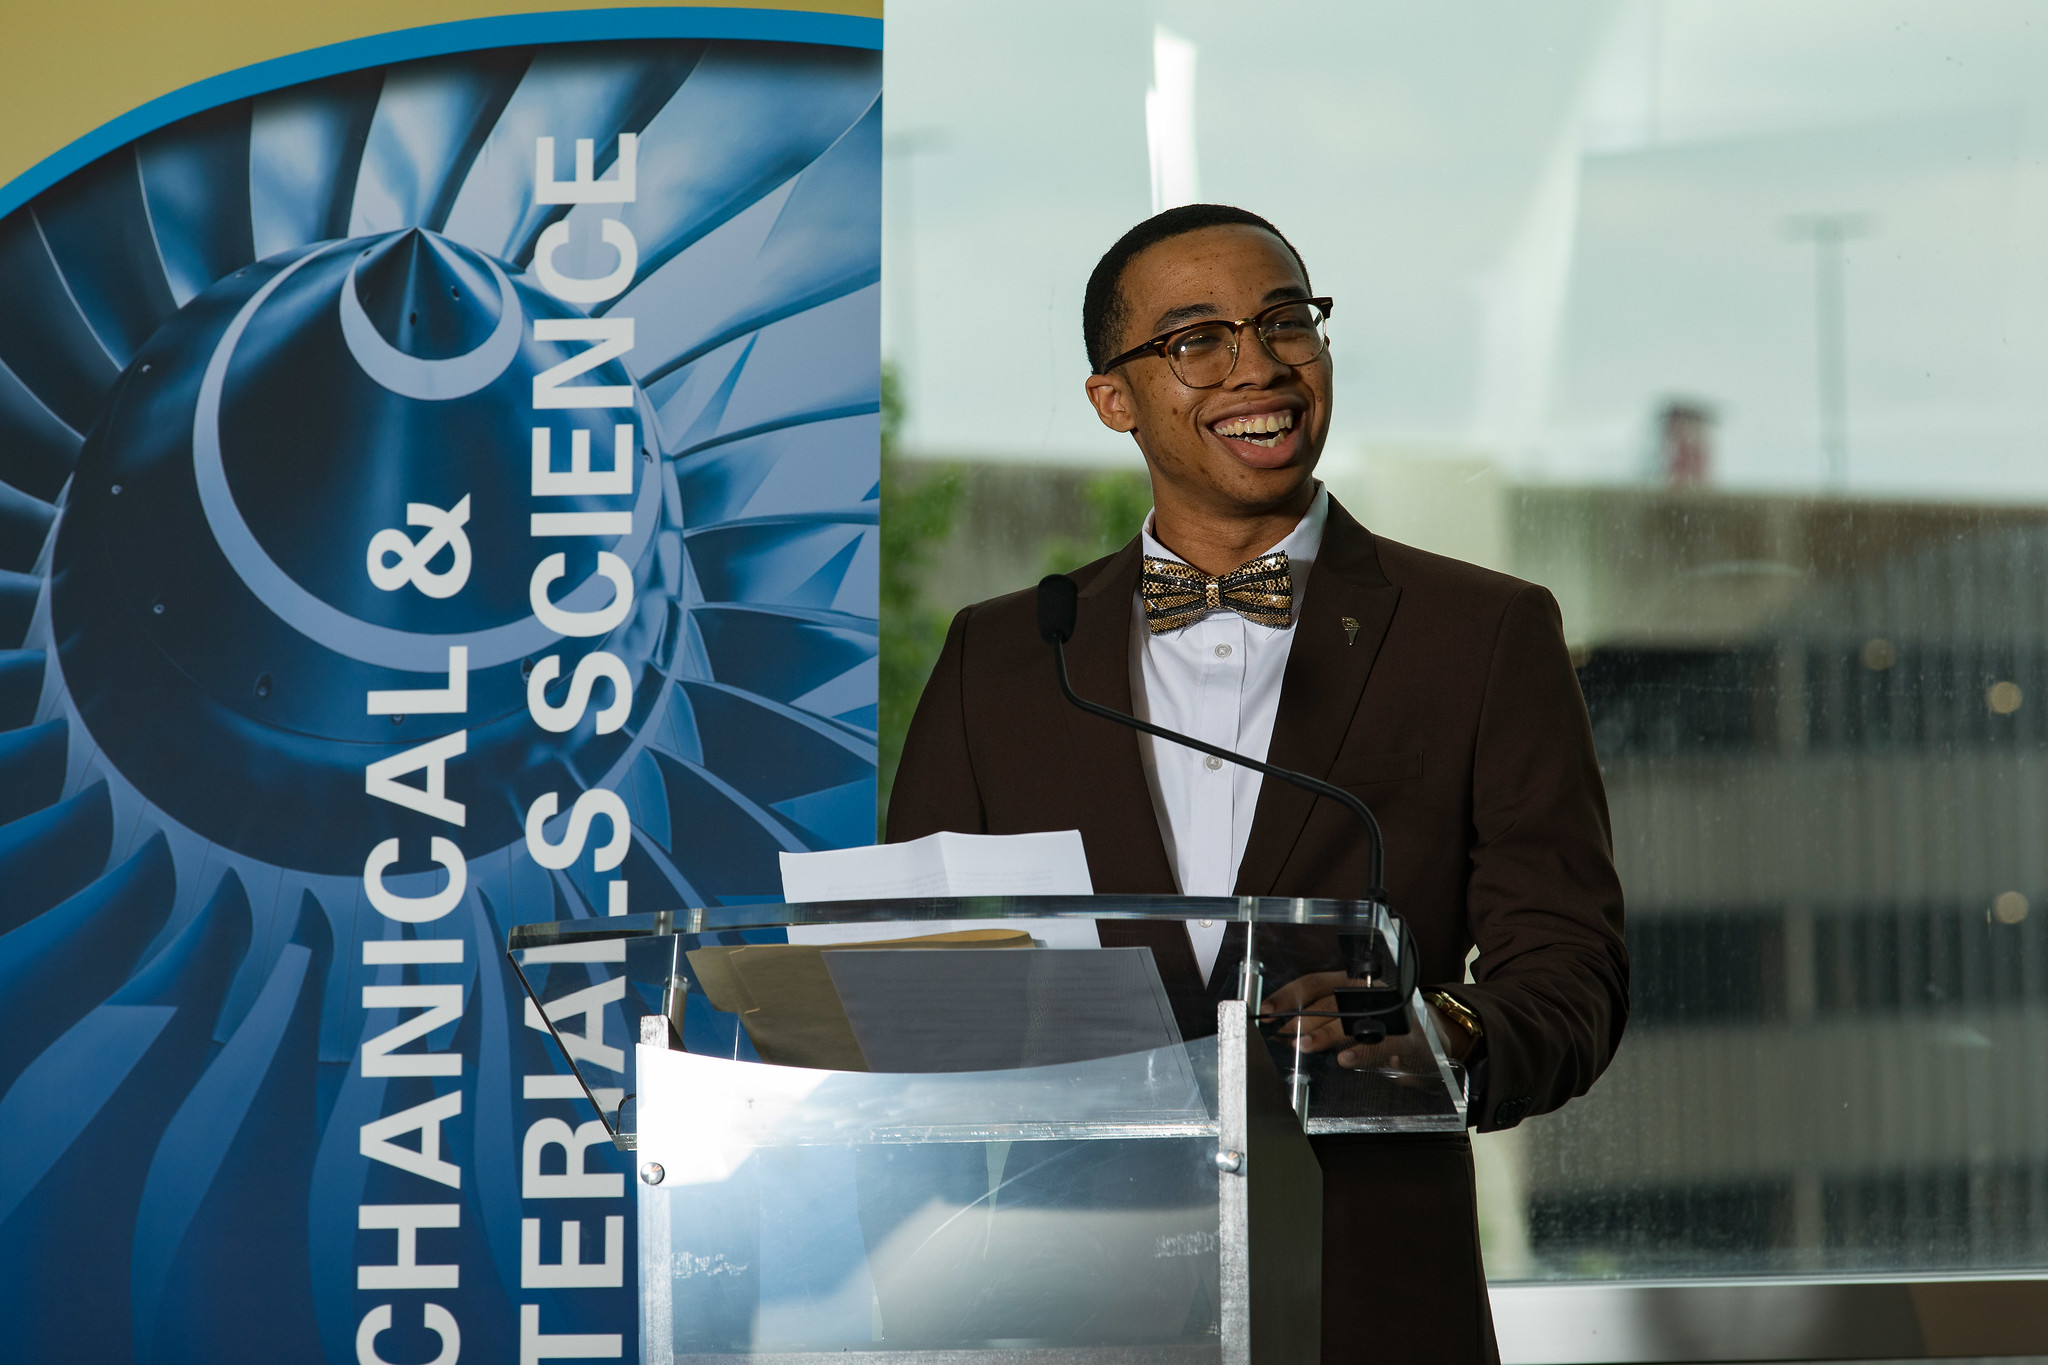 A person in a suit talking in front of a podium